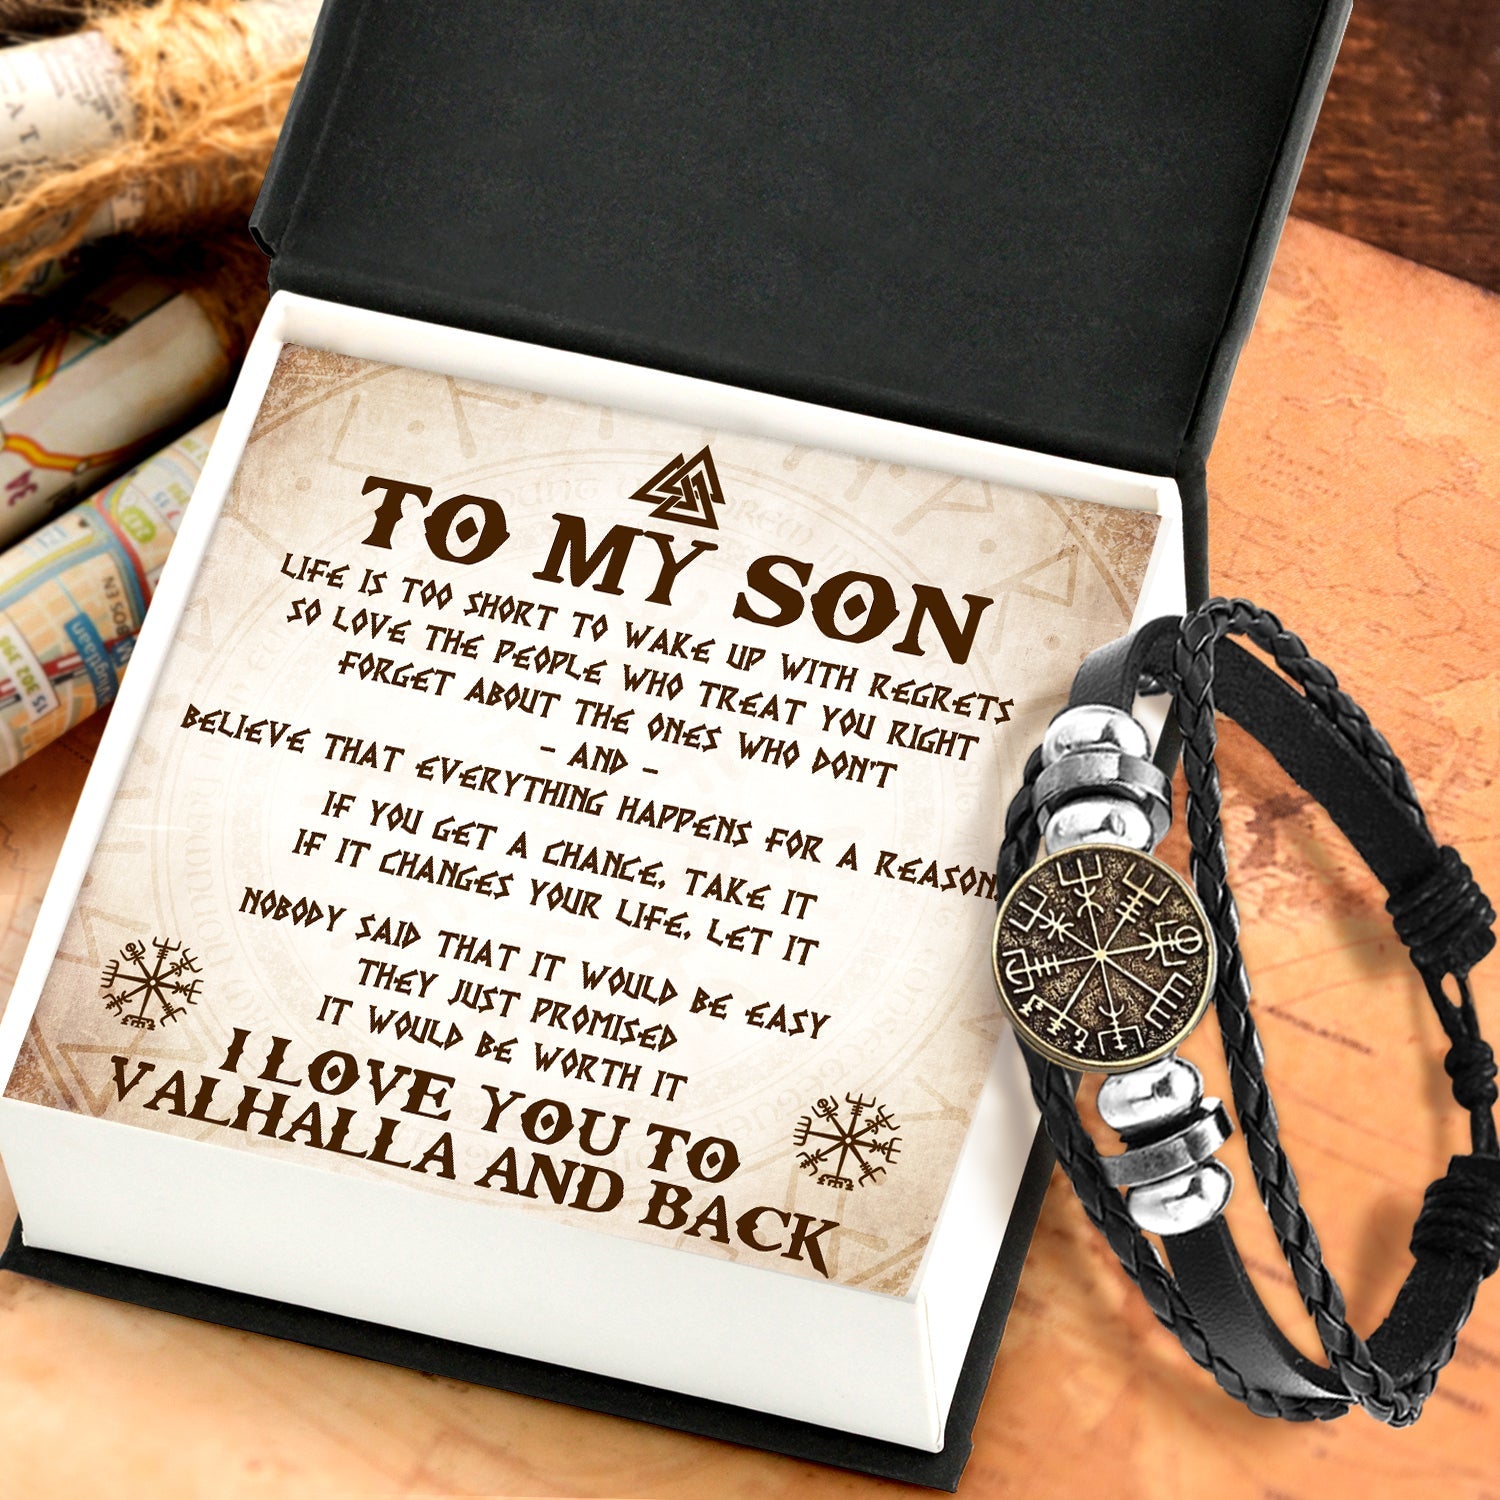 Viking Compass Bracelet - Viking - To My Viking Son - I Love You To Valhalla And Back